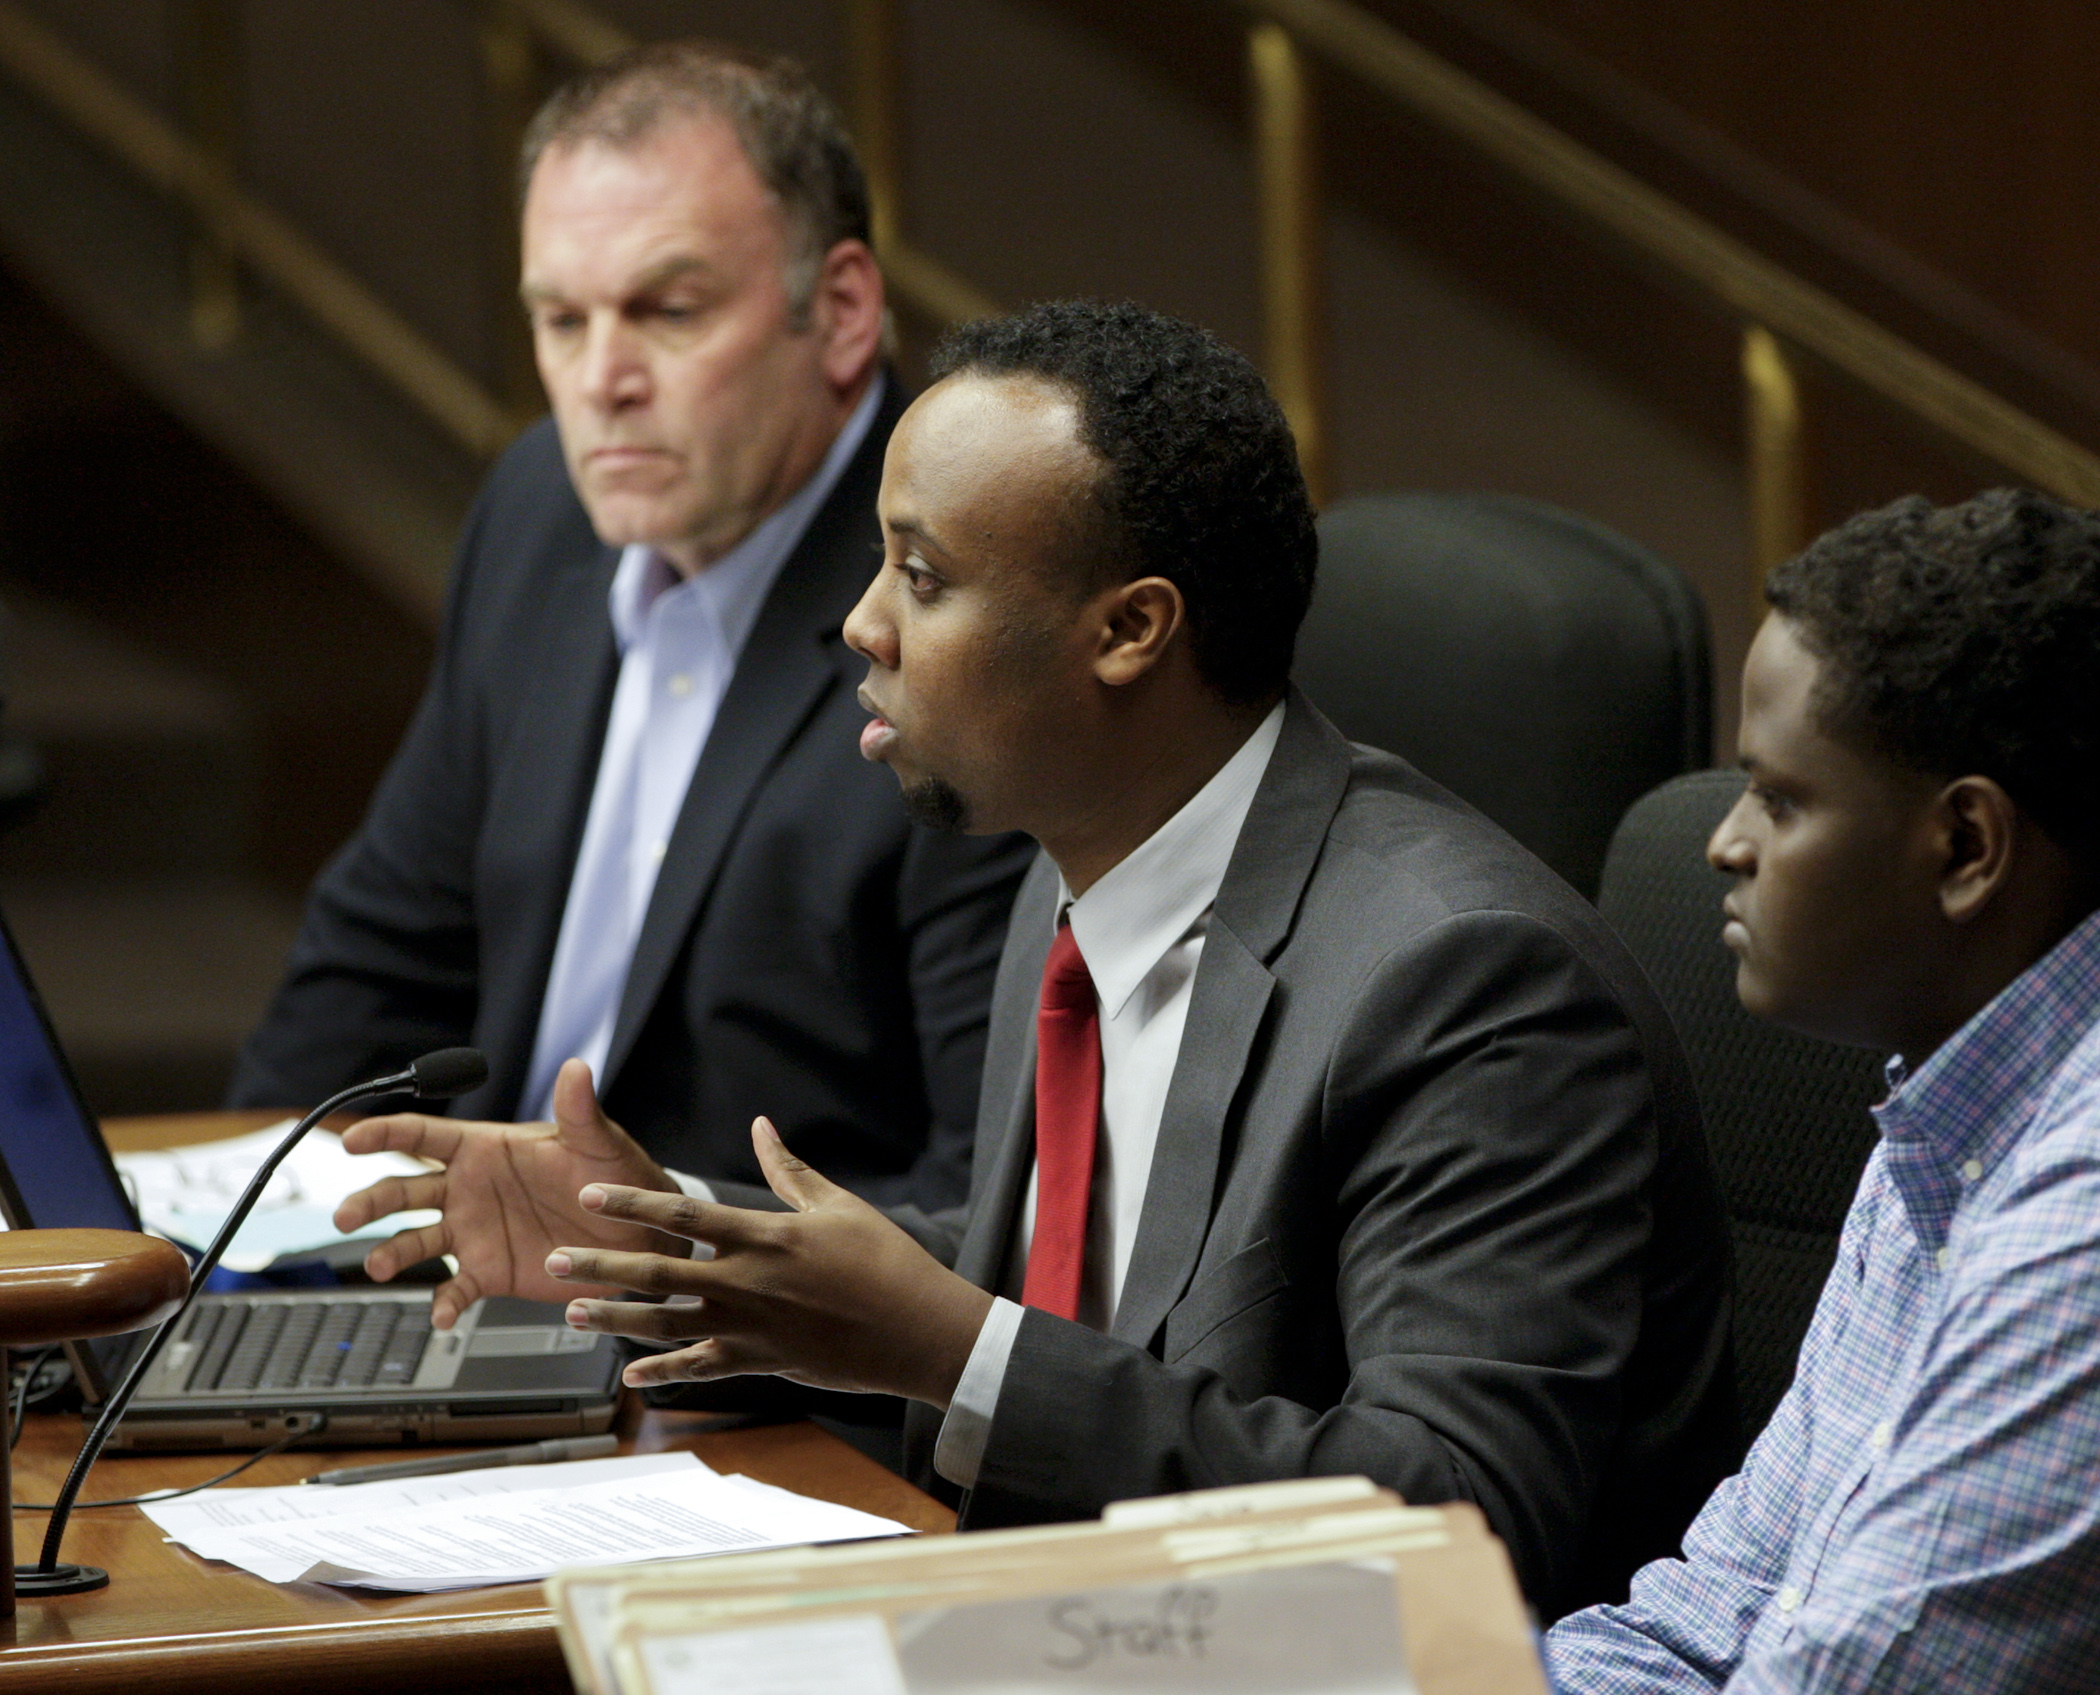 Mohamed Farah, executive director of Ka Joog, testifies March 2, in favor of HF967 that would provide funding for Somali arts and cultural heritage programs. Rep. Dave Baker, left, sponsors the bill. Photo by Paul Battaglia